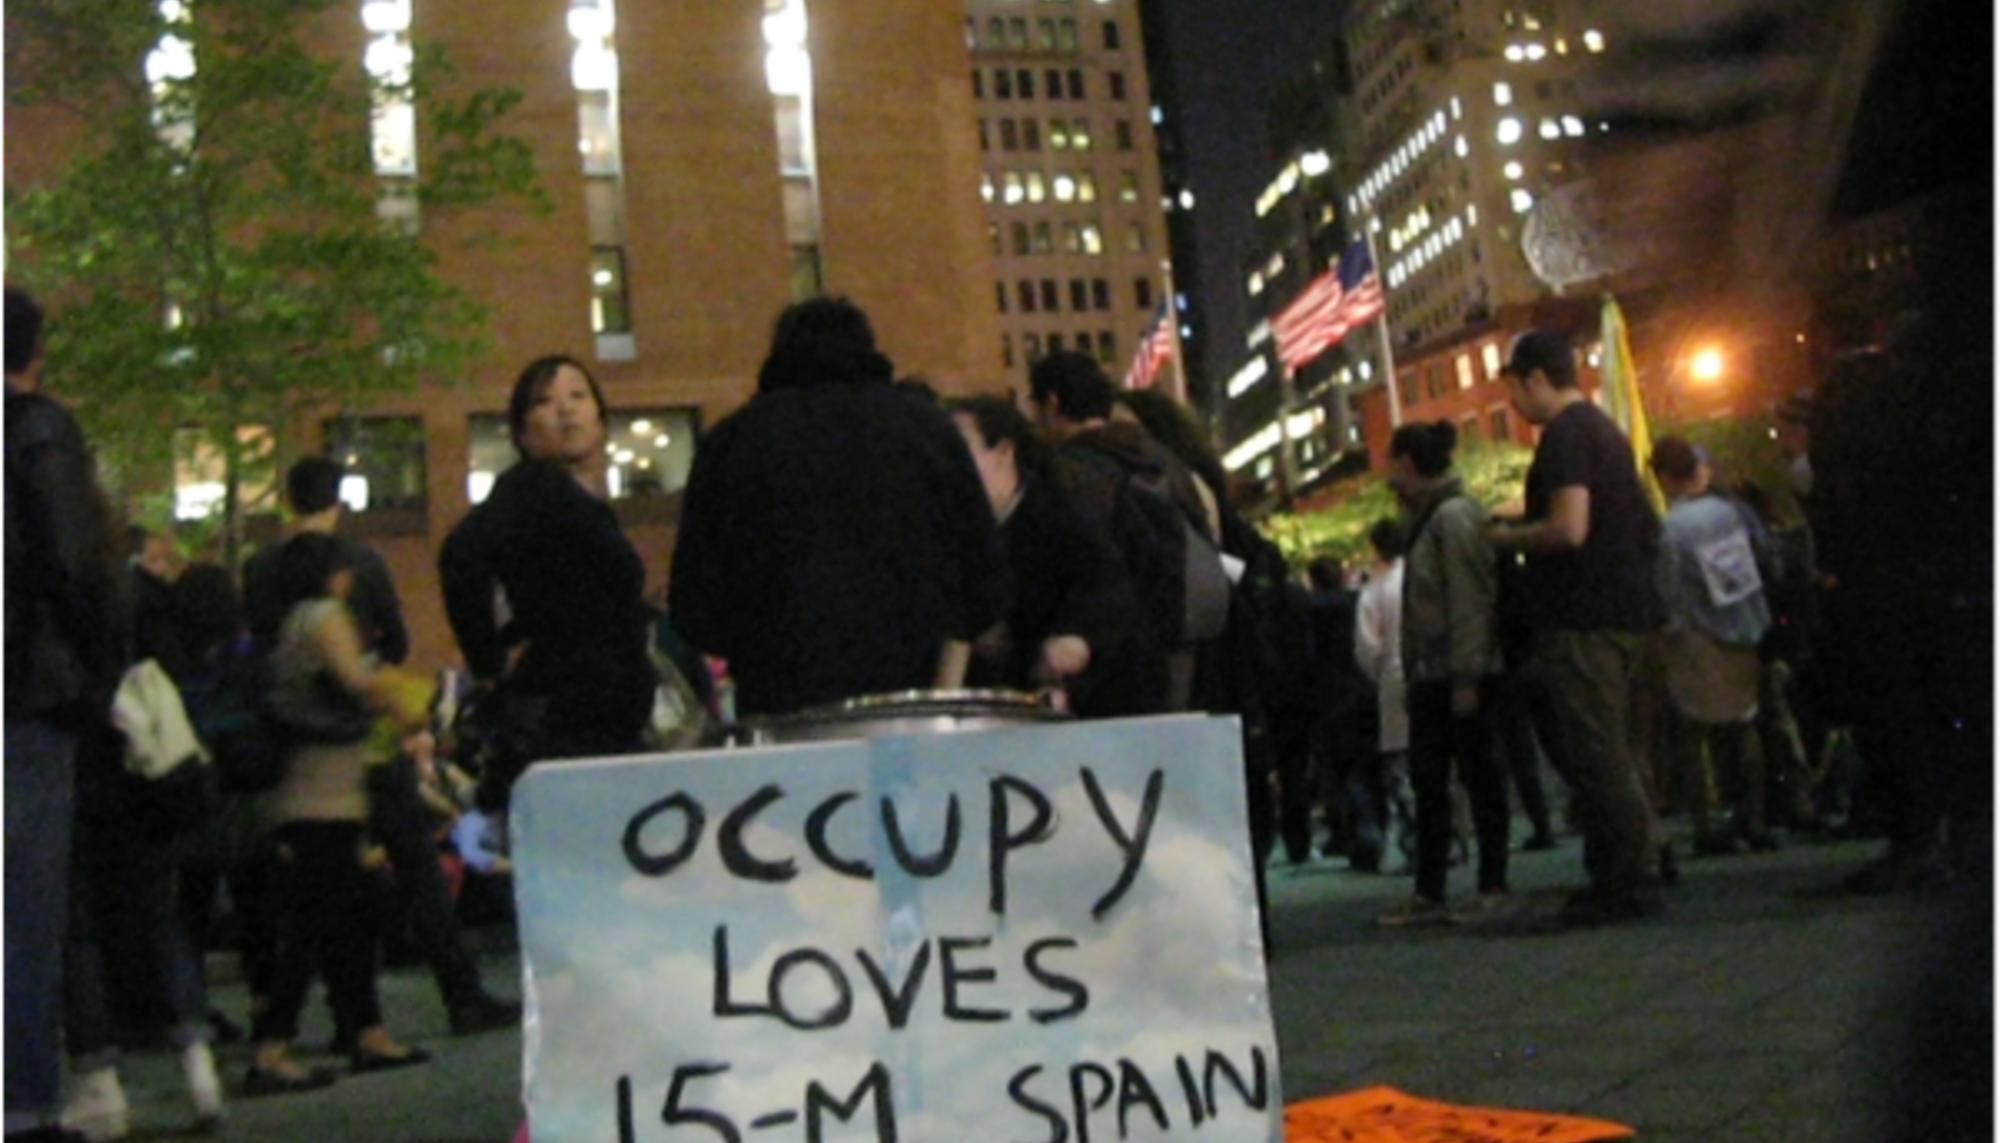 Occupy loves 15M